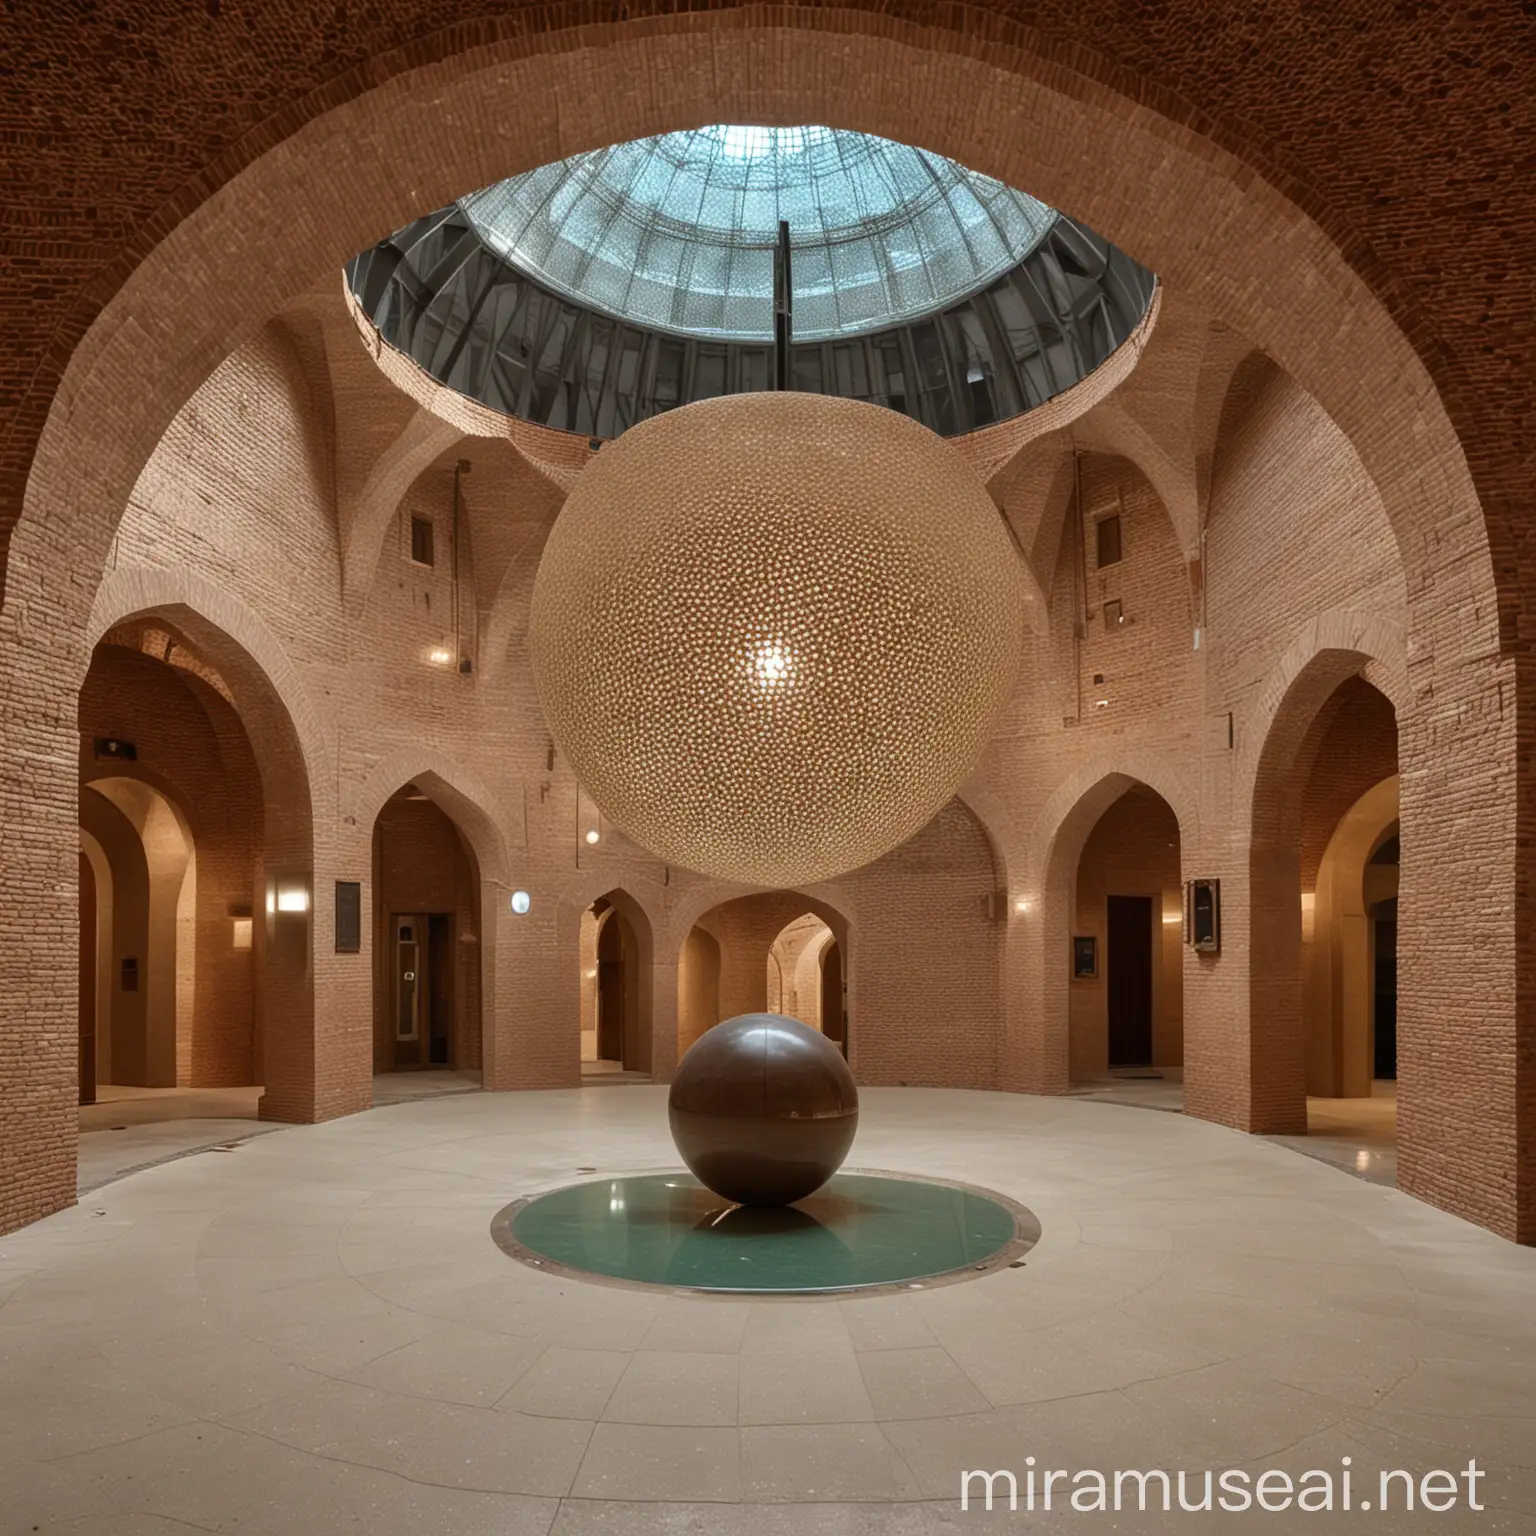 Iranian Architecture Maquette in Museum Lobby at Night